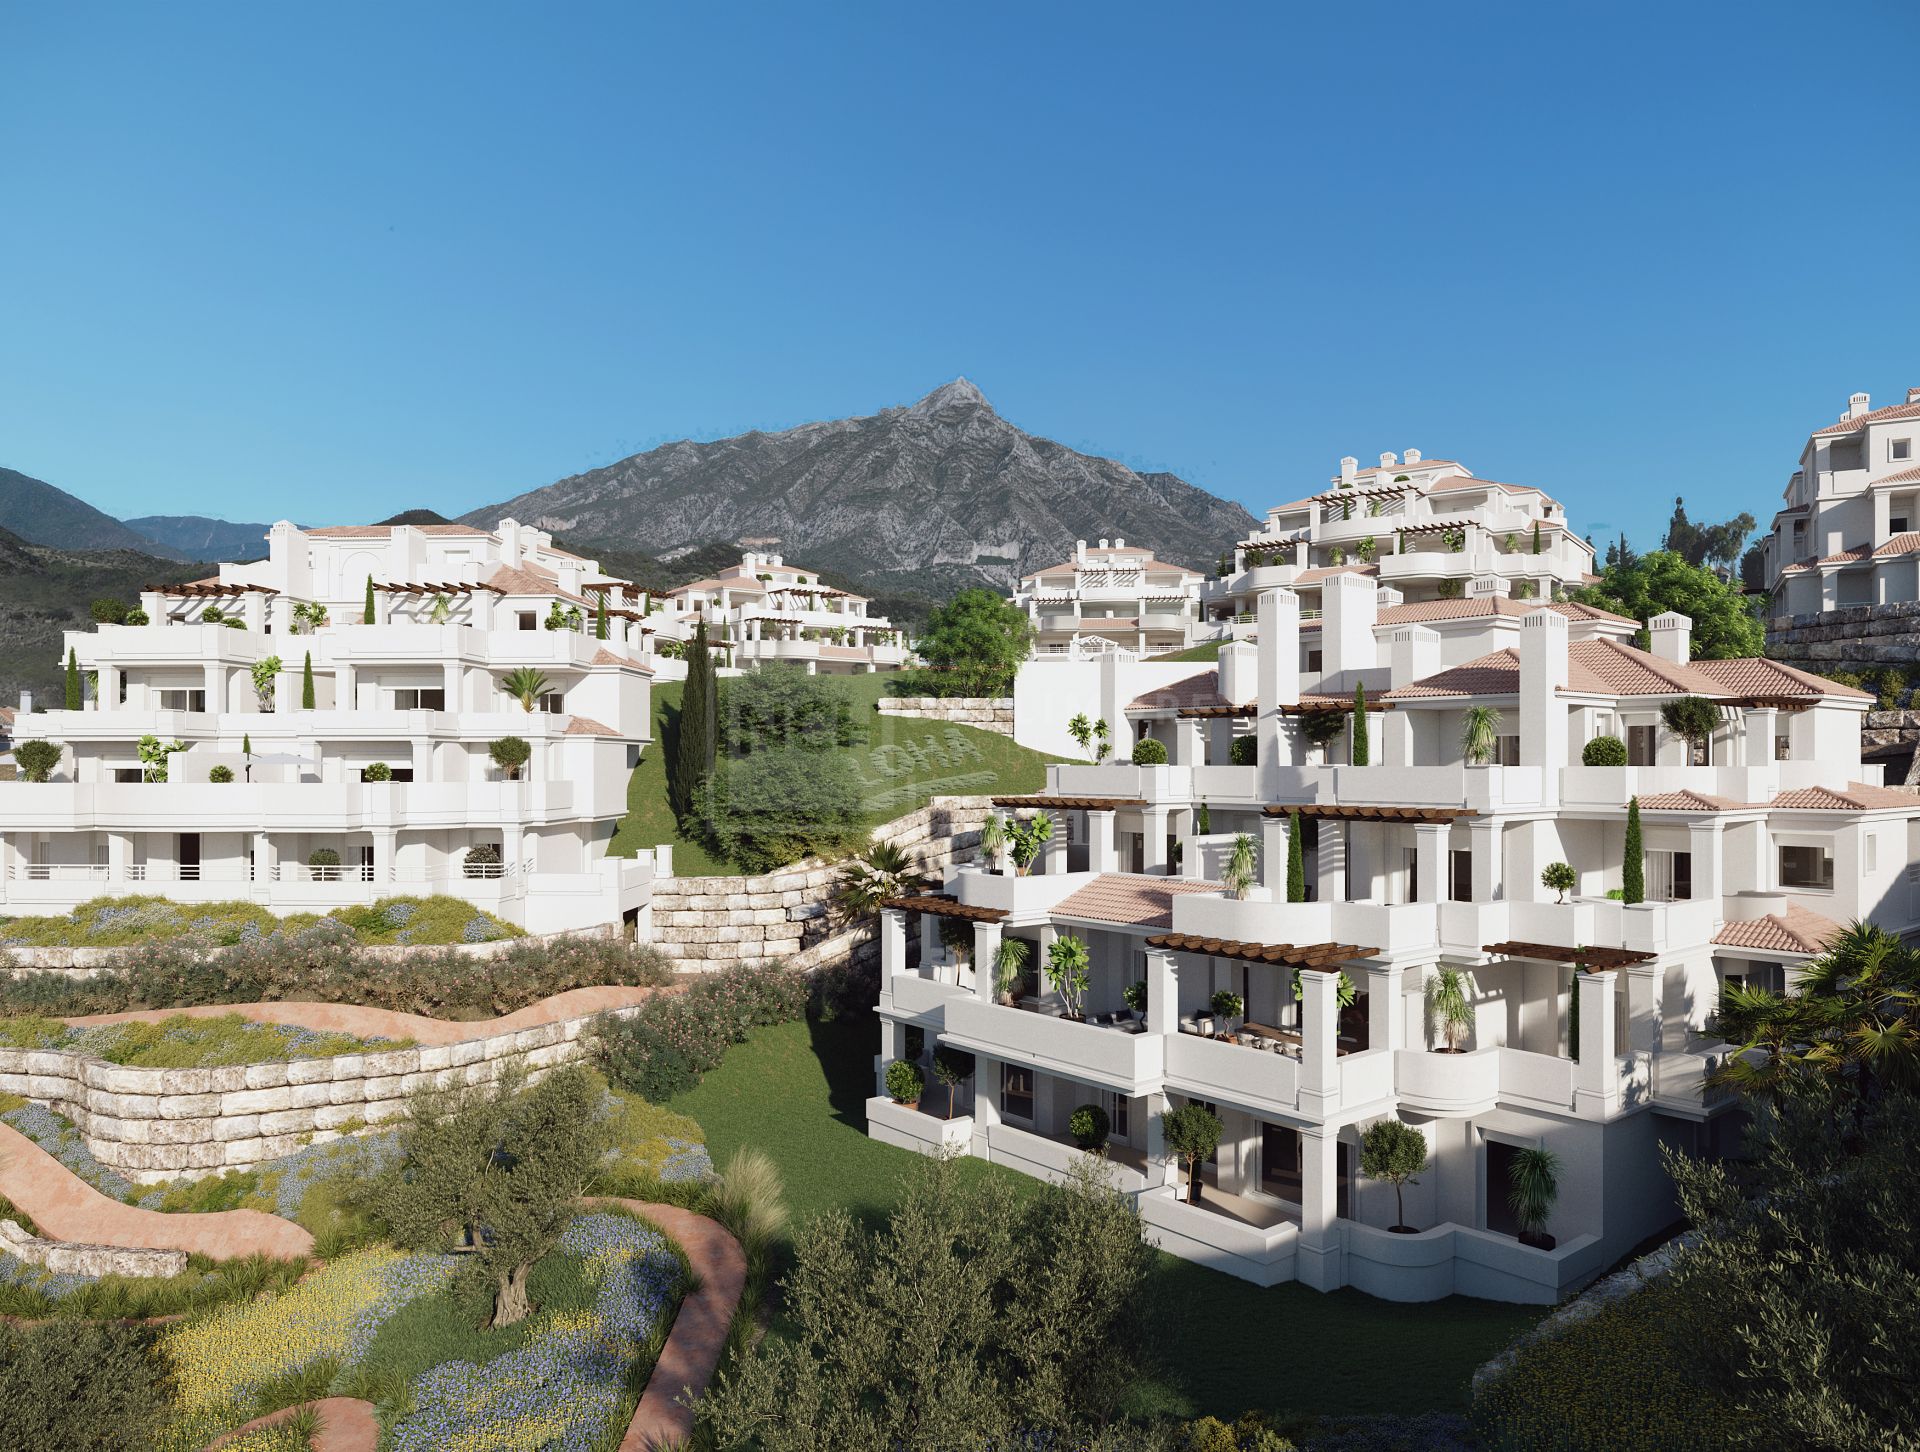 BRAND NEW 2-BEDROOM CONTEMPORARY PENTHOUSE APARTMENT IN GOLF VALLEY NUEVA ANDALUCIA MARBELLA